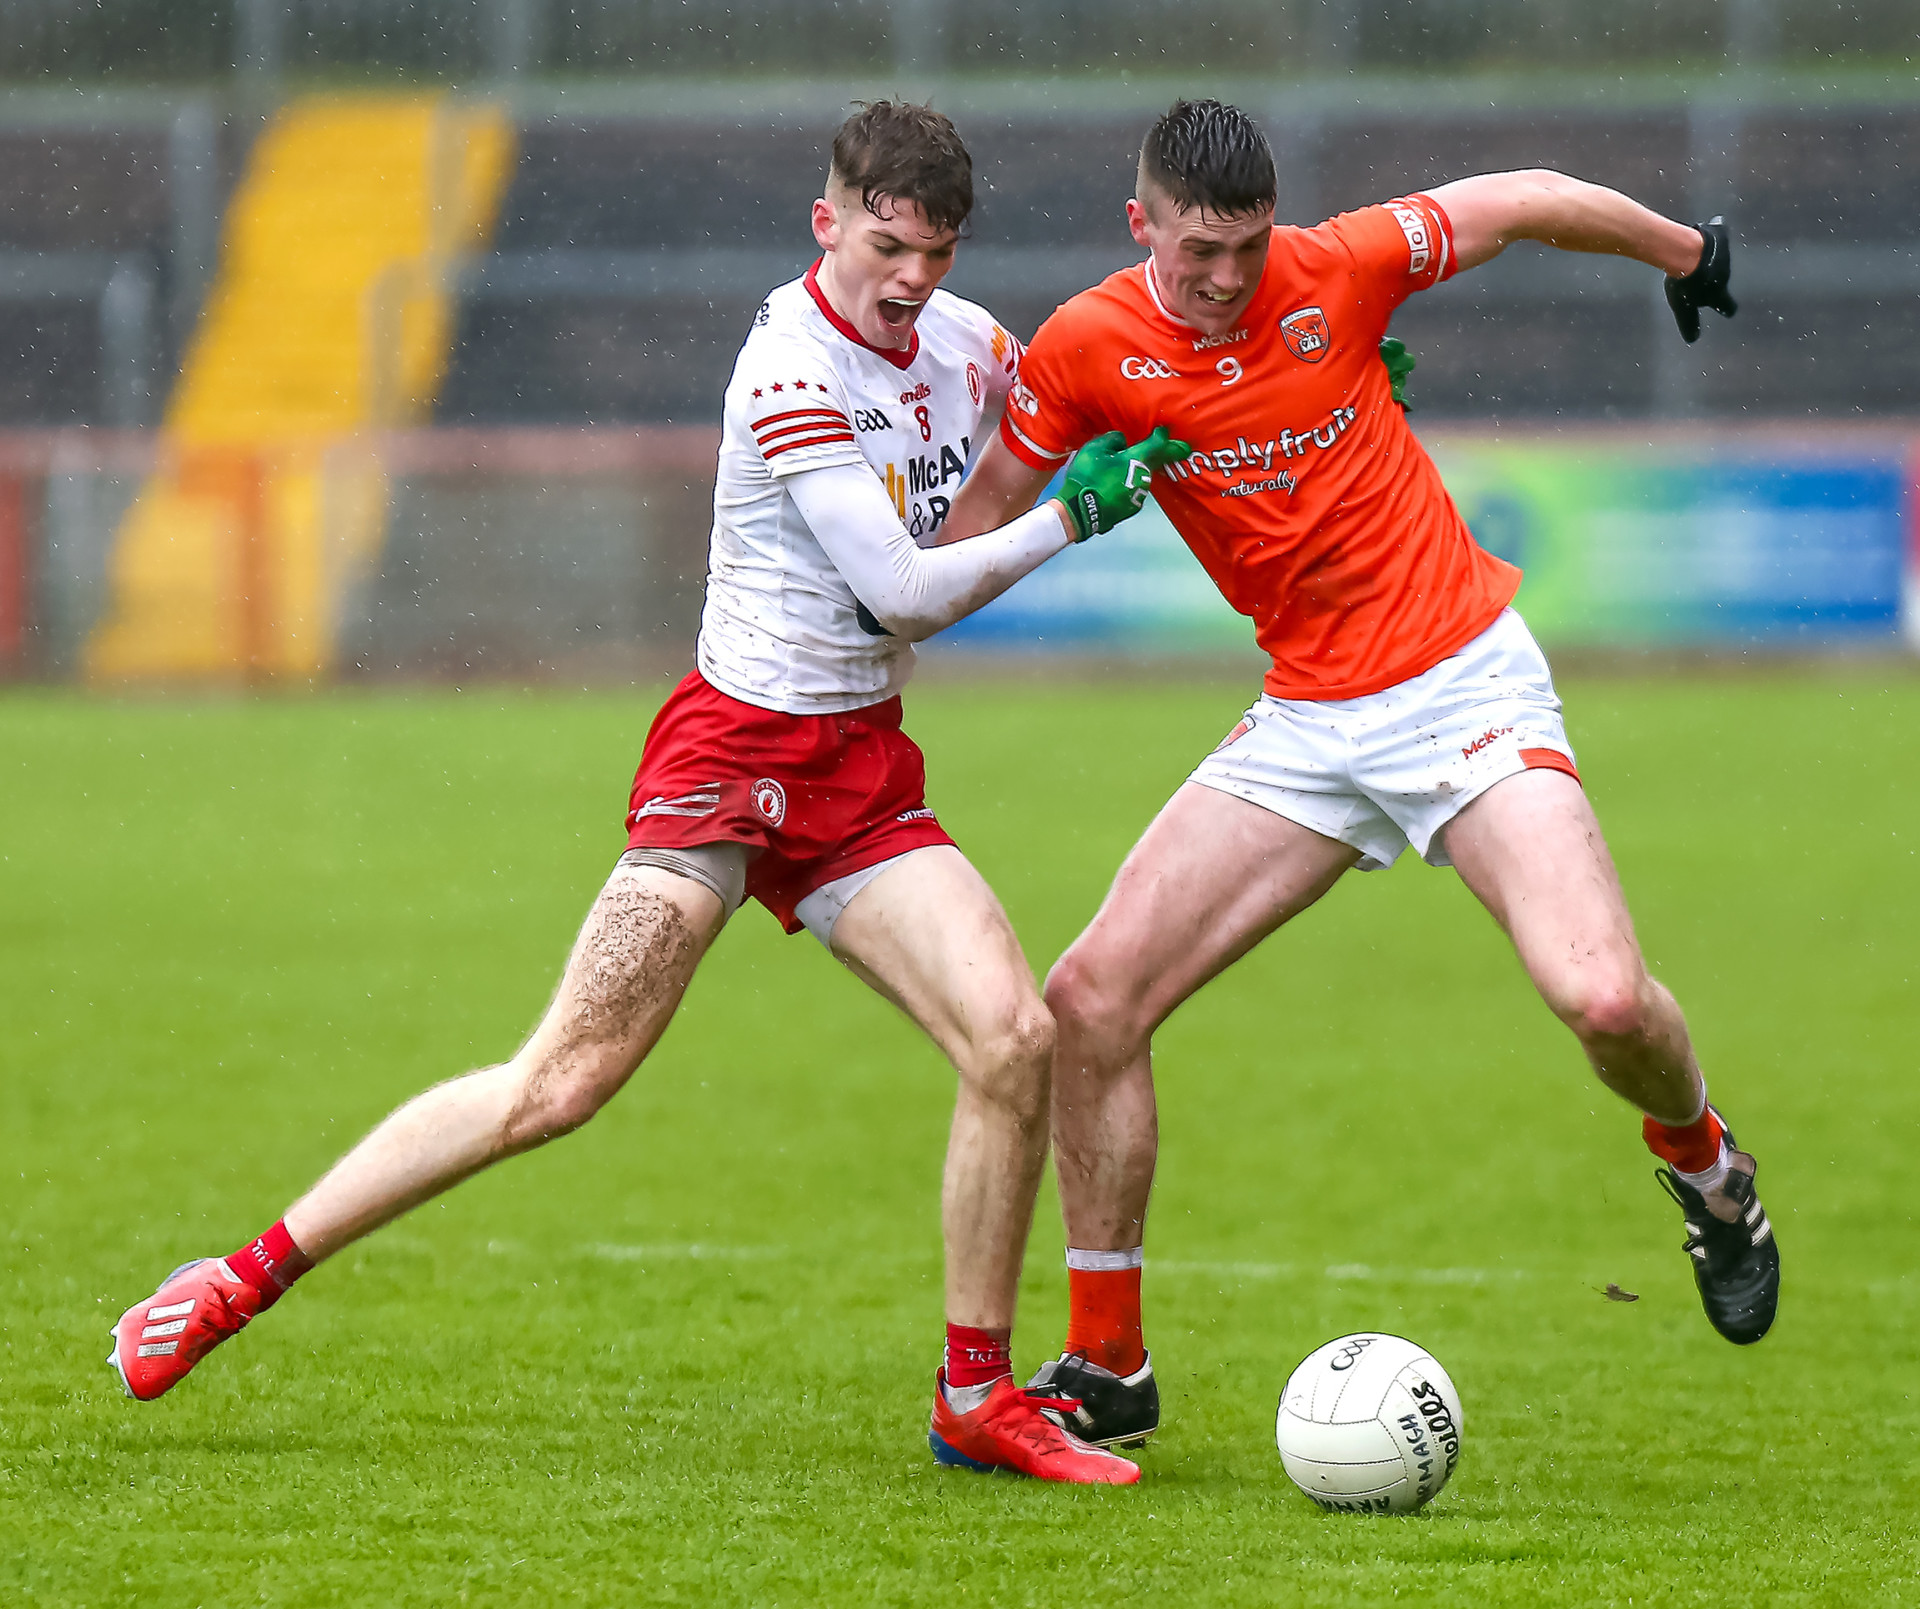 Tyrone Minors have a strong team bond-Corry